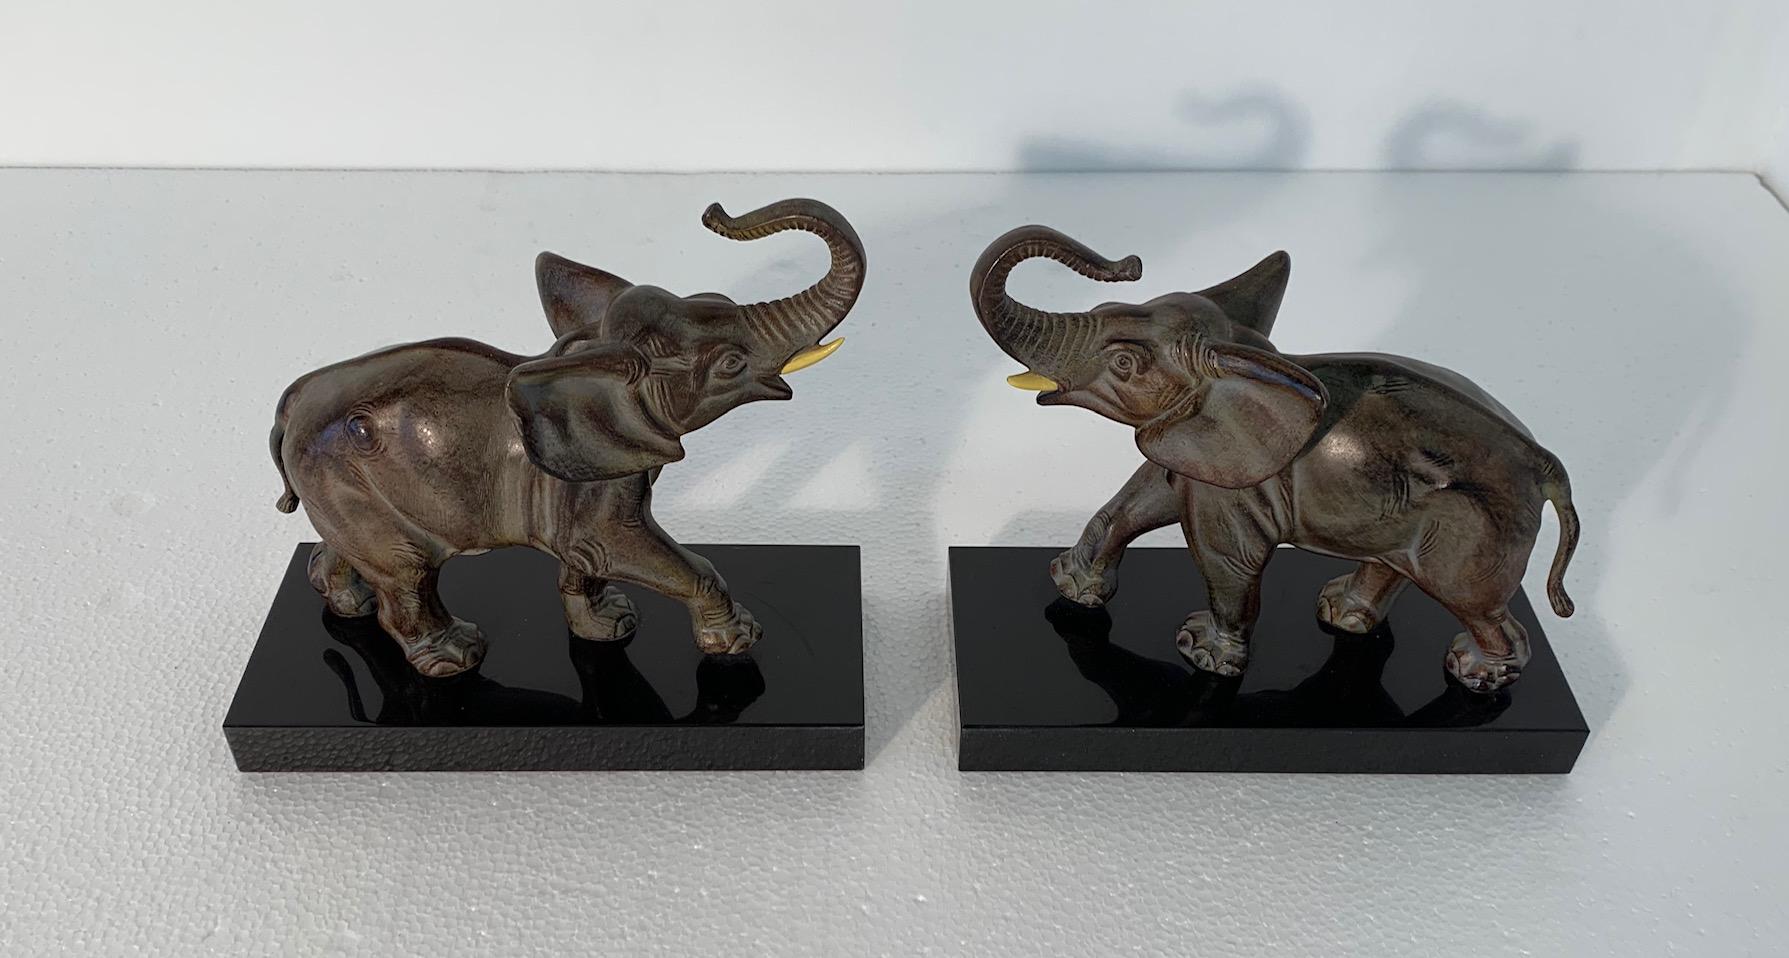 Pair of French Art Deco bookends representing two marching elephants.
Both bookends are made from bronze-colored patinated zamak, vividly detailed.
Both fixed on a black veined marble pedestal.
  